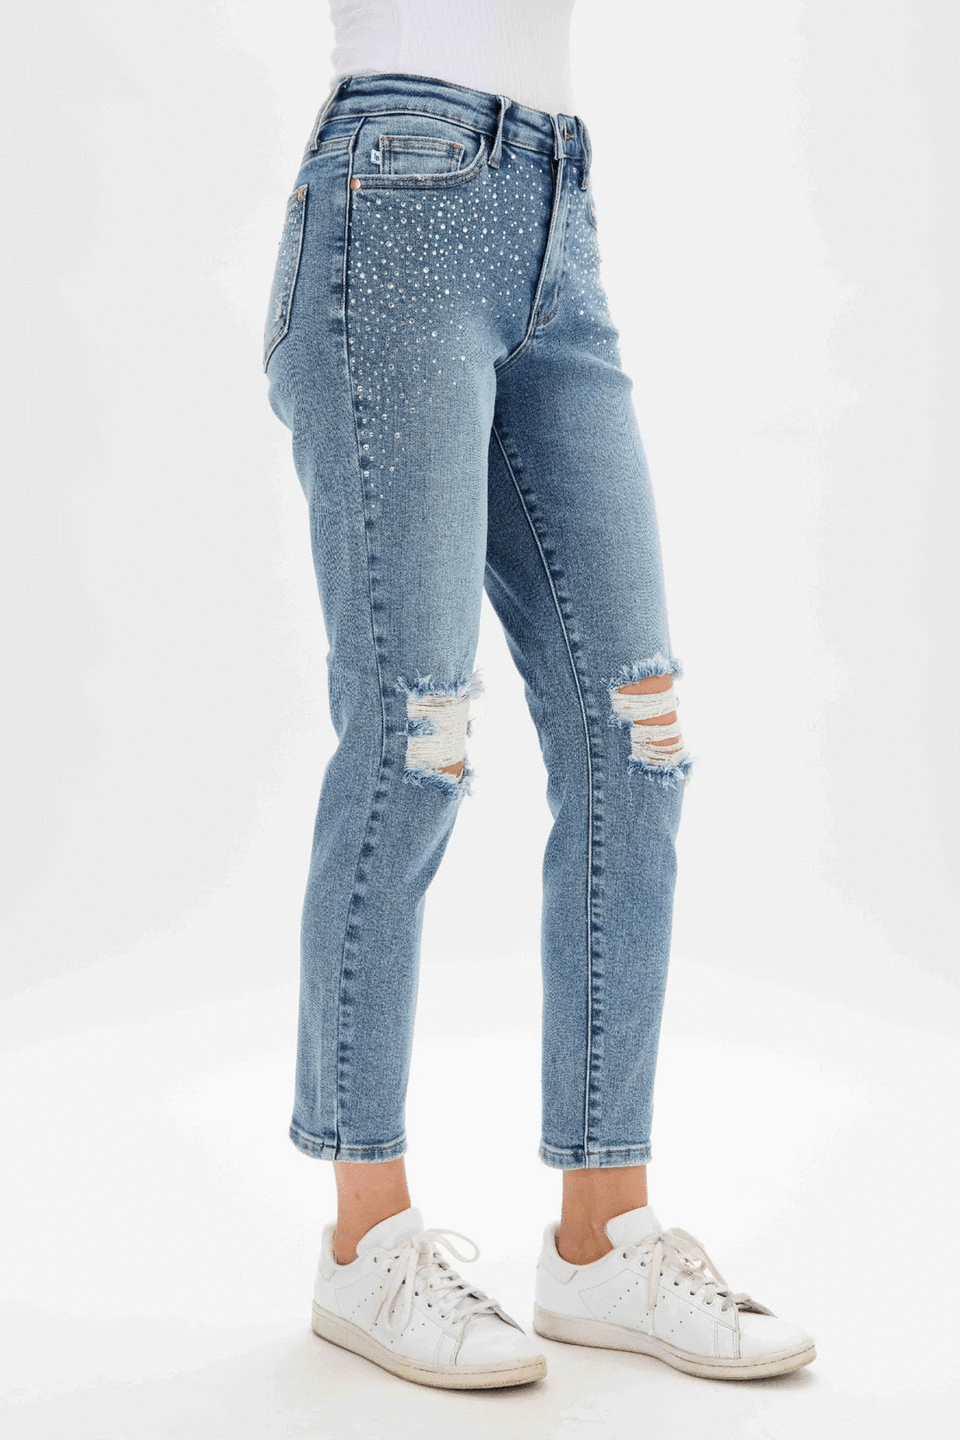 Judy Blue Bejewelled Jeans